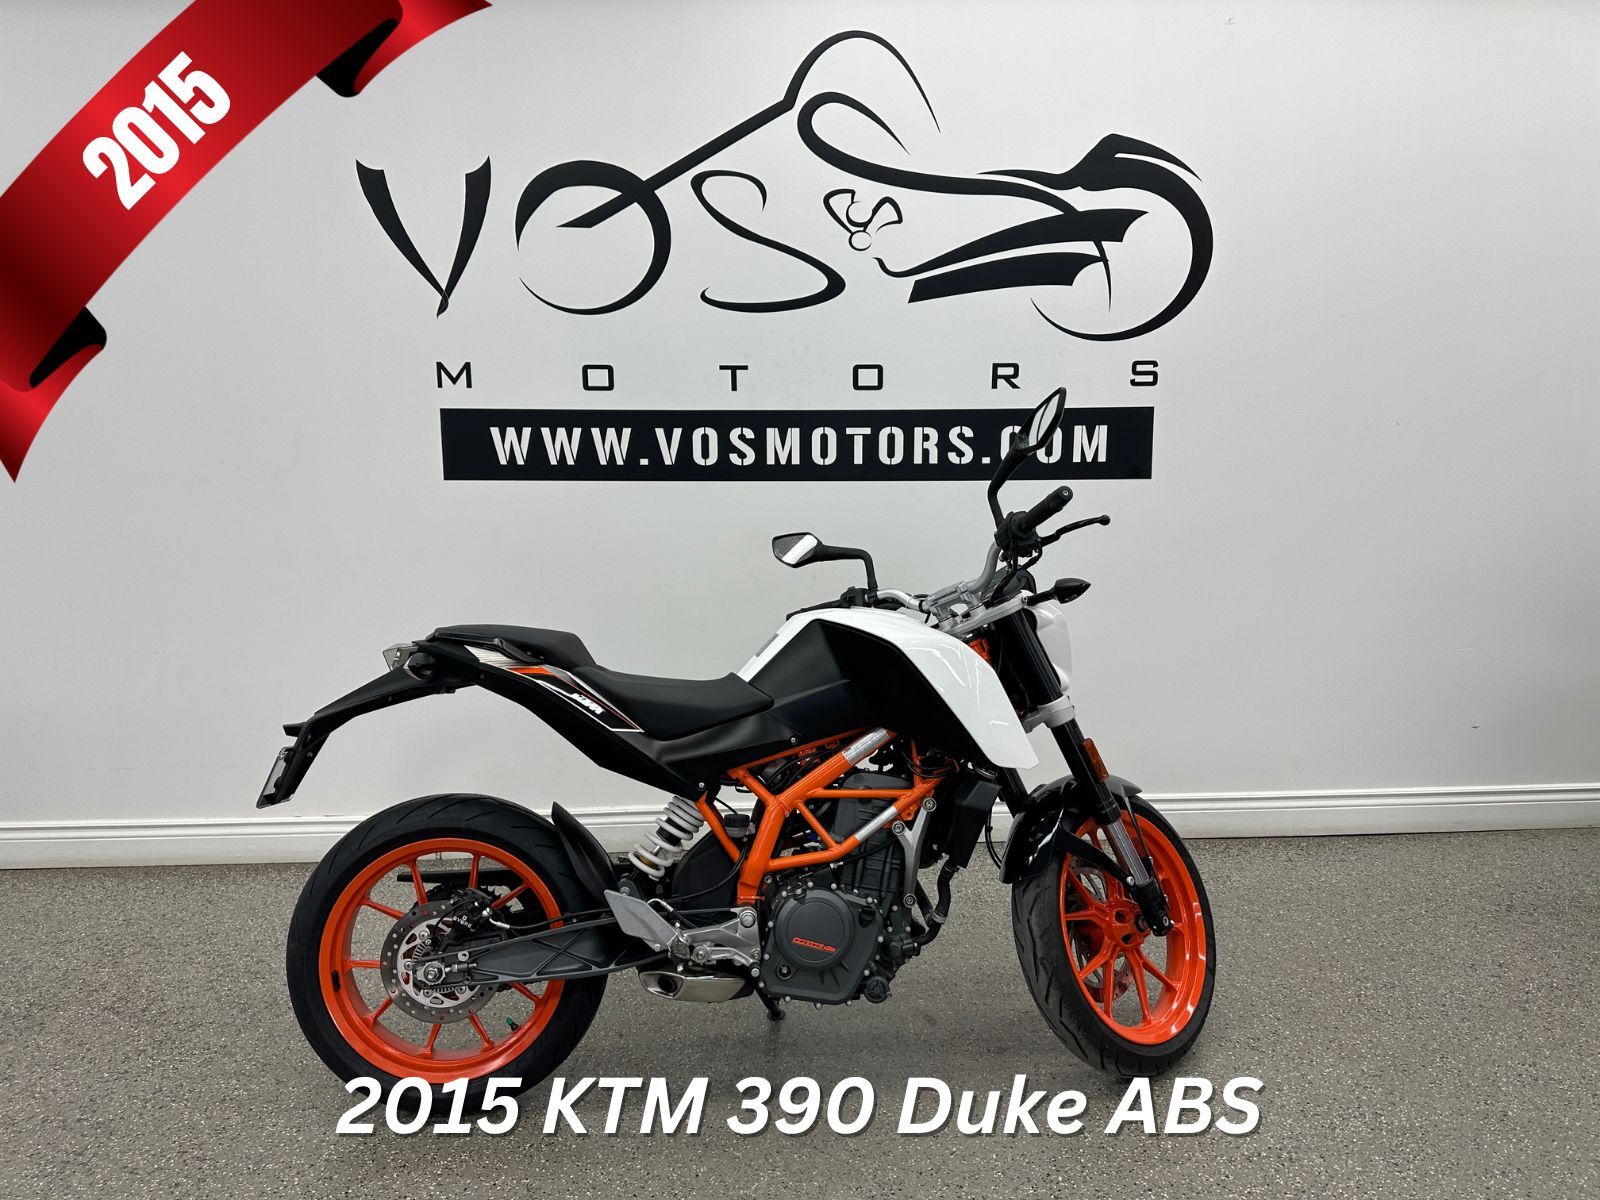 2015 KTM 390 Duke ABS Naked bike - V5935 - -No Payments for 1 Year**